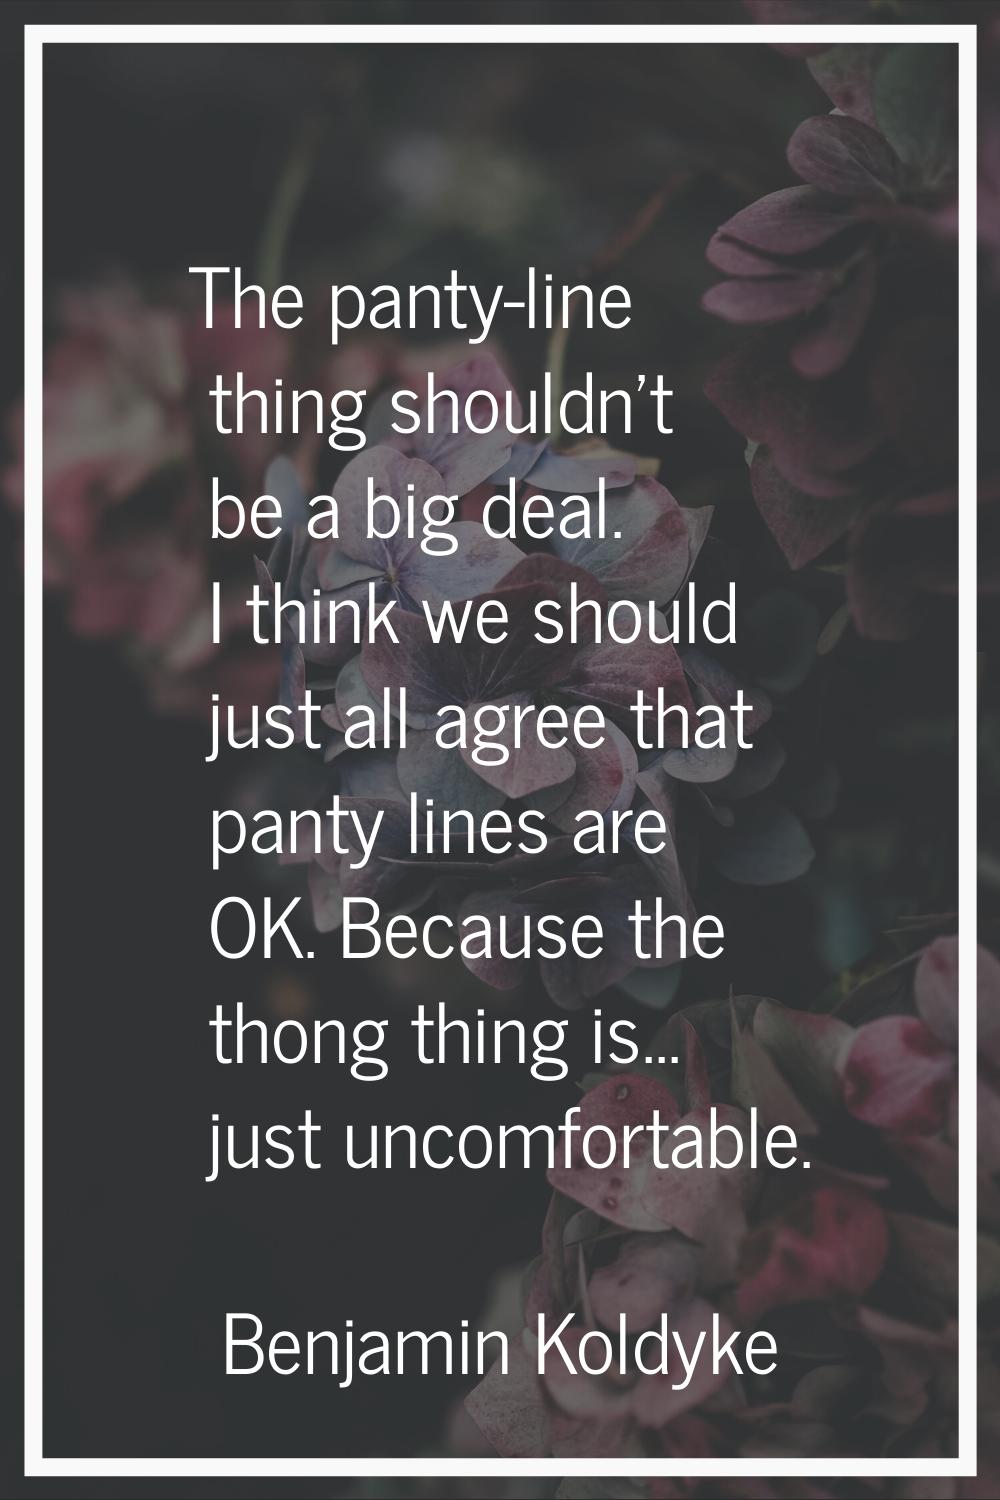 The panty-line thing shouldn't be a big deal. I think we should just all agree that panty lines are